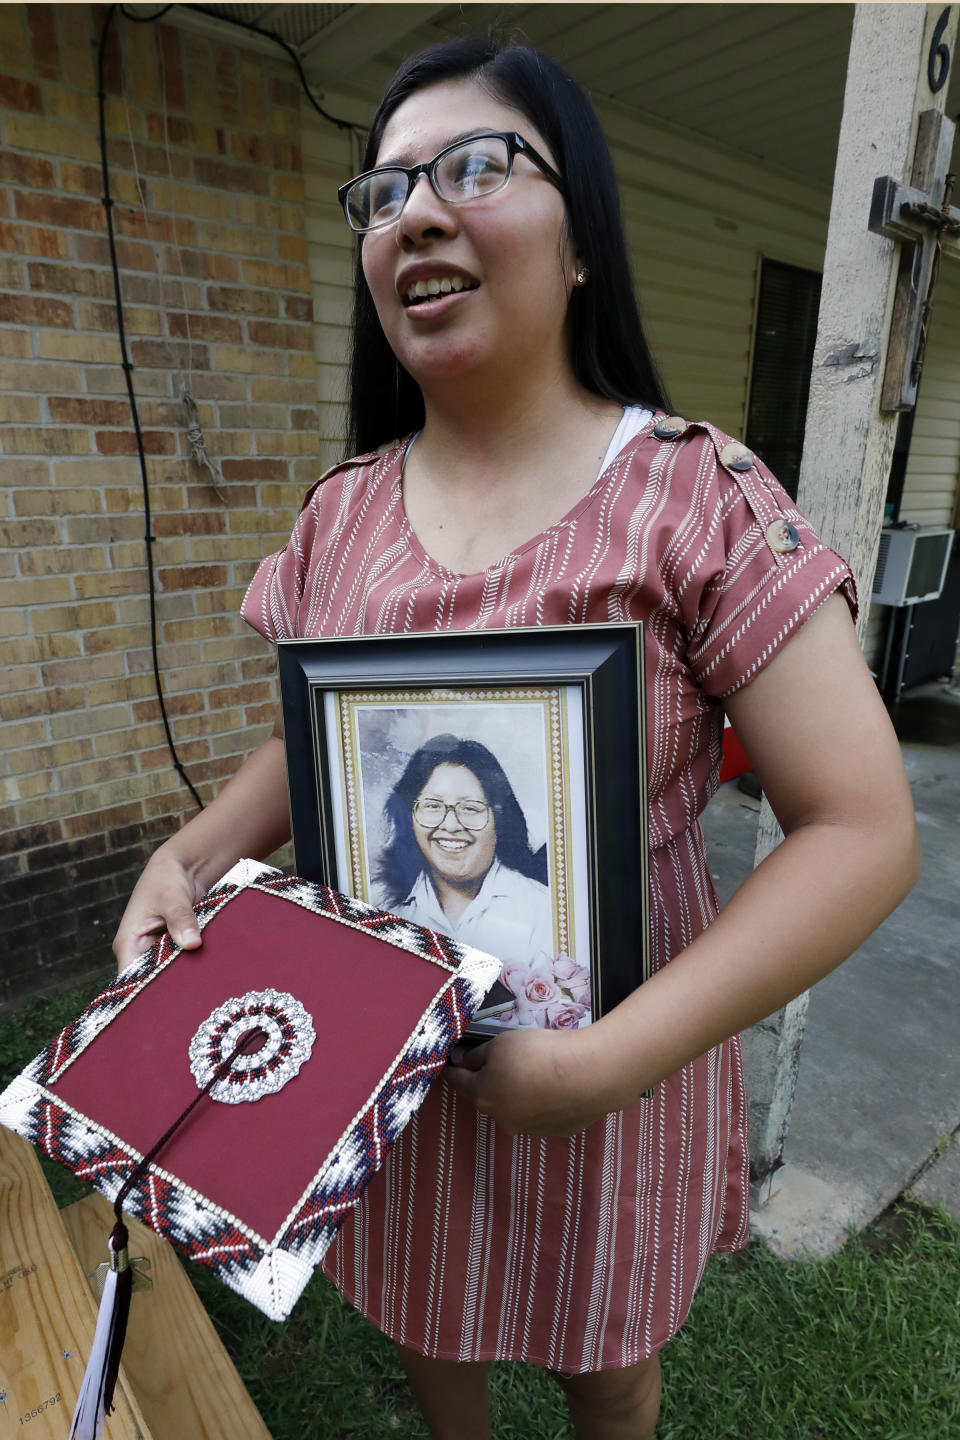 Kristina Taylor, 18, holds a portrait of her late mother, Sharon Taylor, and the special beaded mortar board she would have worn during graduation ceremonies at Choctaw Central High School, Tuesday, July 22, 2020 in Tucker, Miss. For the Taylor family, June 2020 was supposed to be for celebrating daughter Kristina being selected as valedictorian at Choctaw Central High, the tribal high school for the Mississippi Band of Choctaw Indians. Instead, the family buried the mother, a victim of COVID-19. (AP Photo/Rogelio V. Solis)